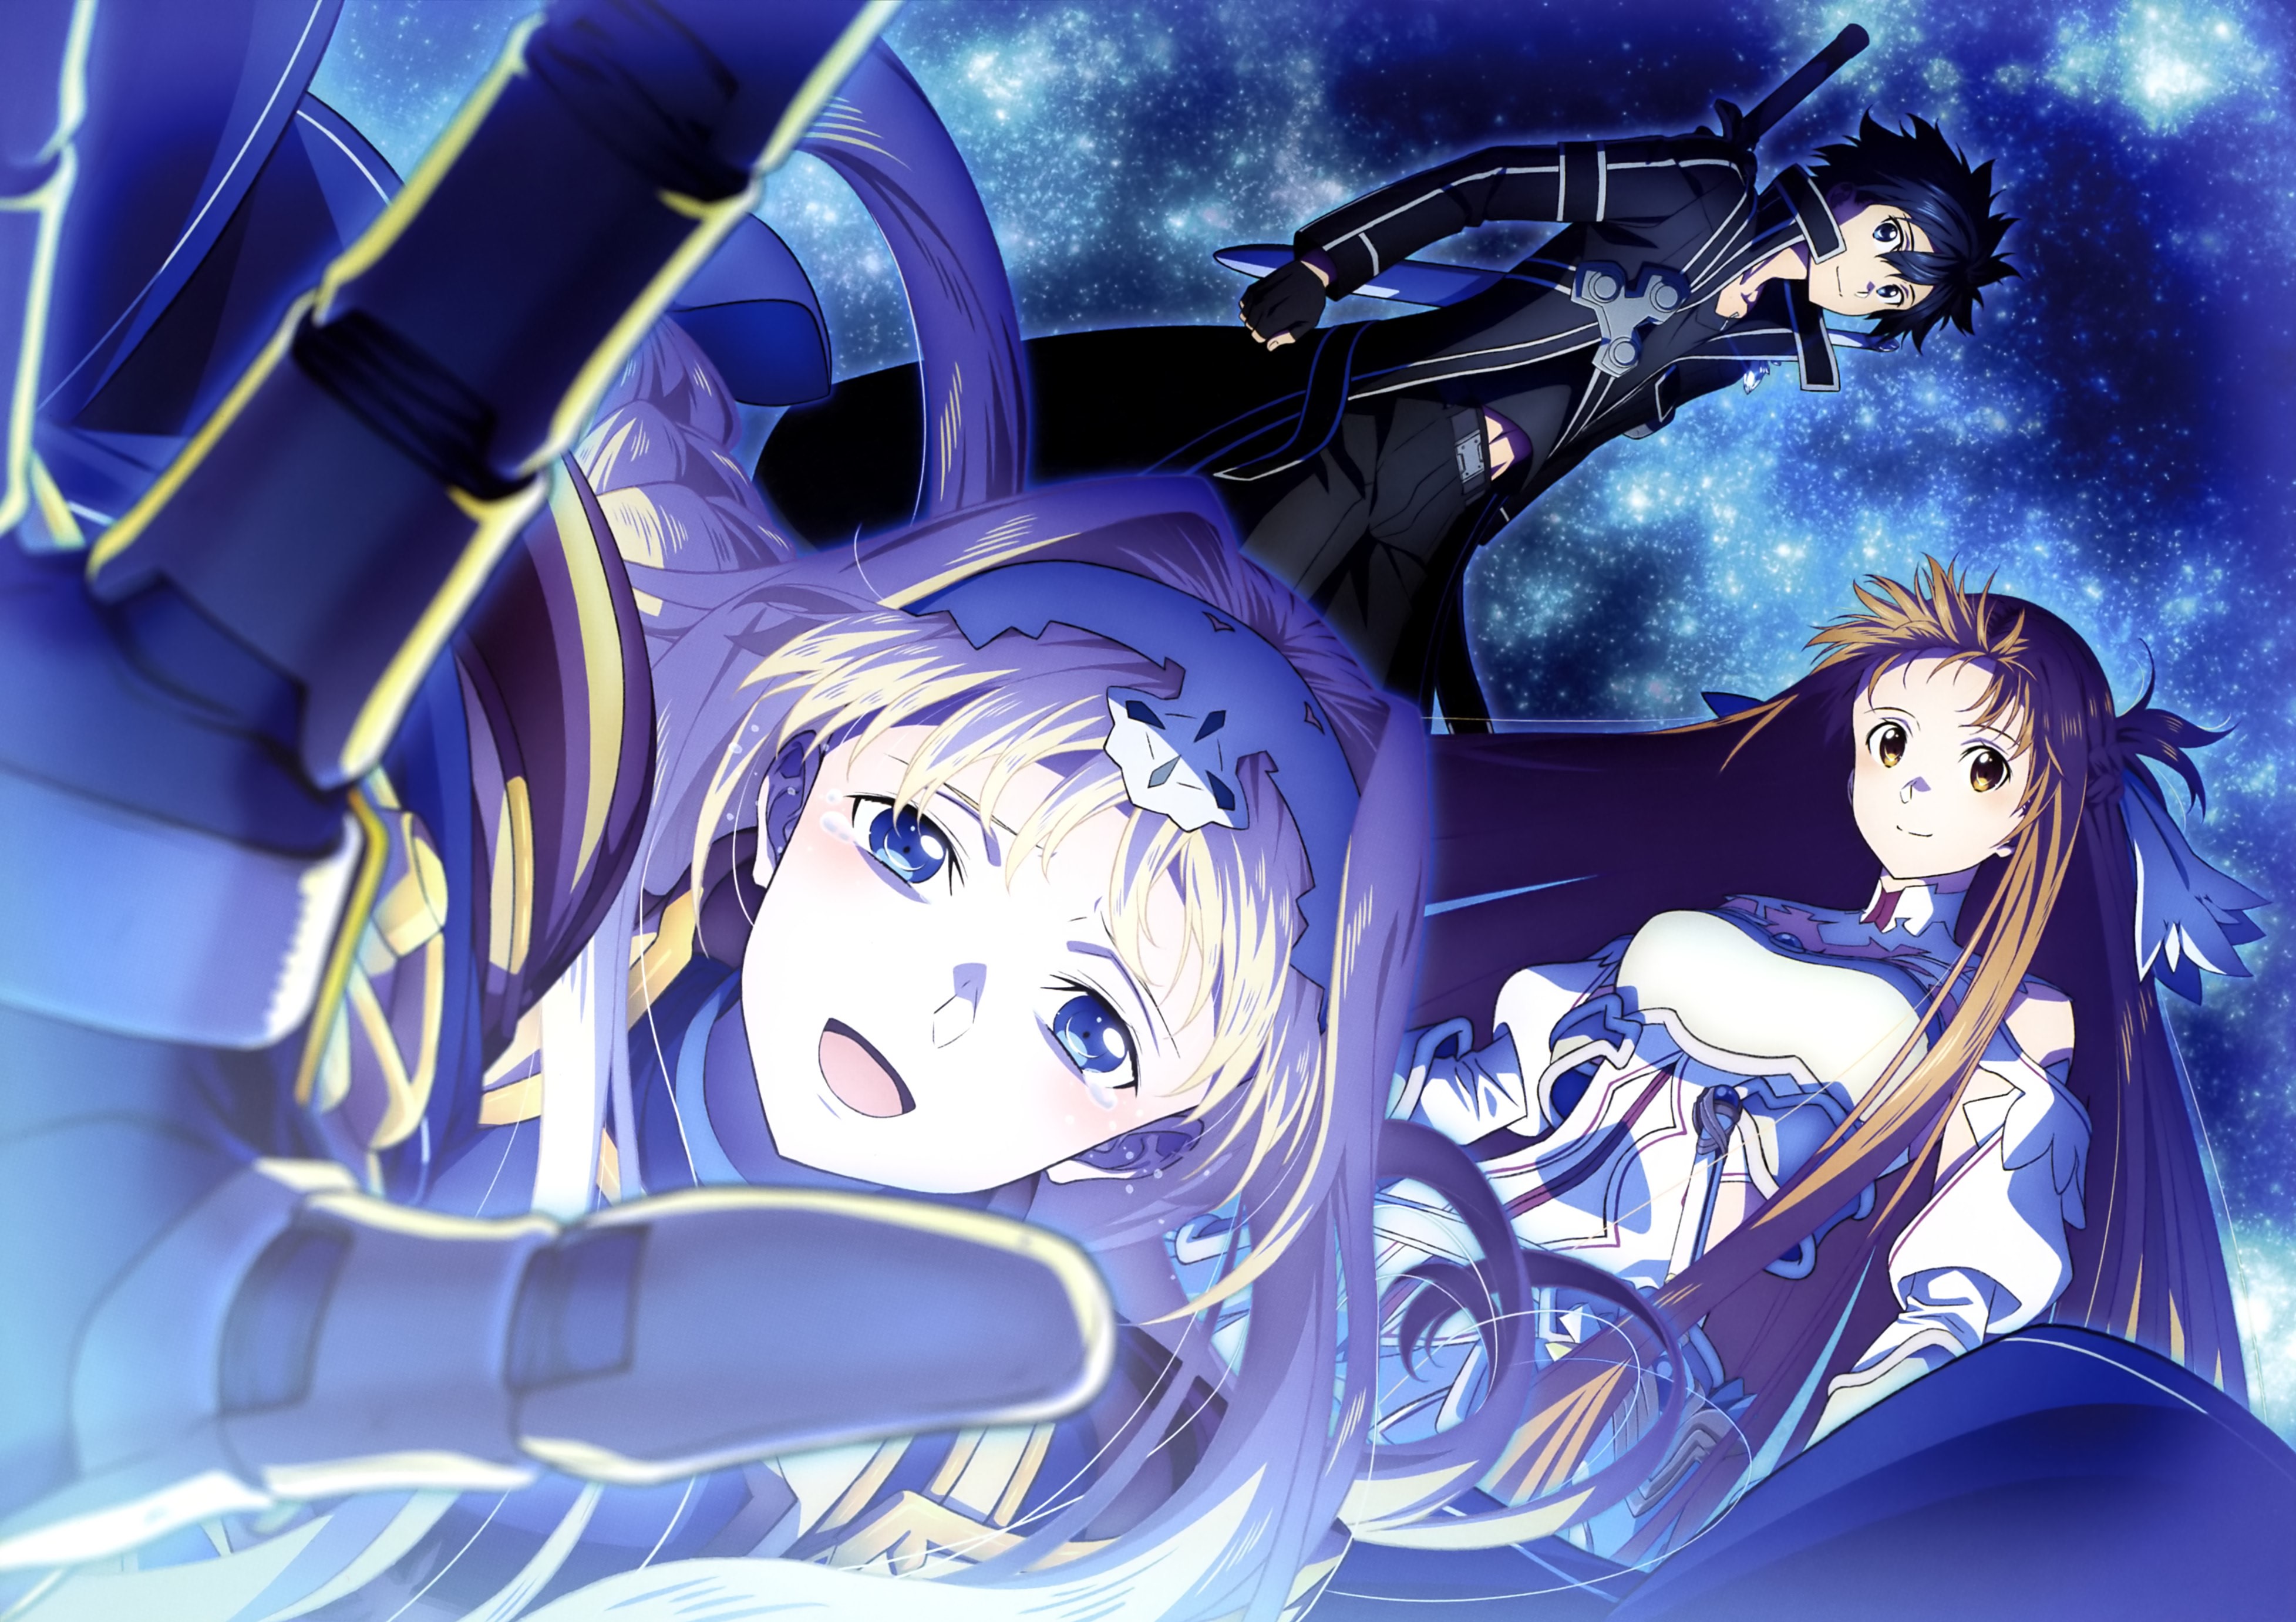 Sword Art Online -FULLDIVE- Sword Art Online -FULLDIVE- - Watch on